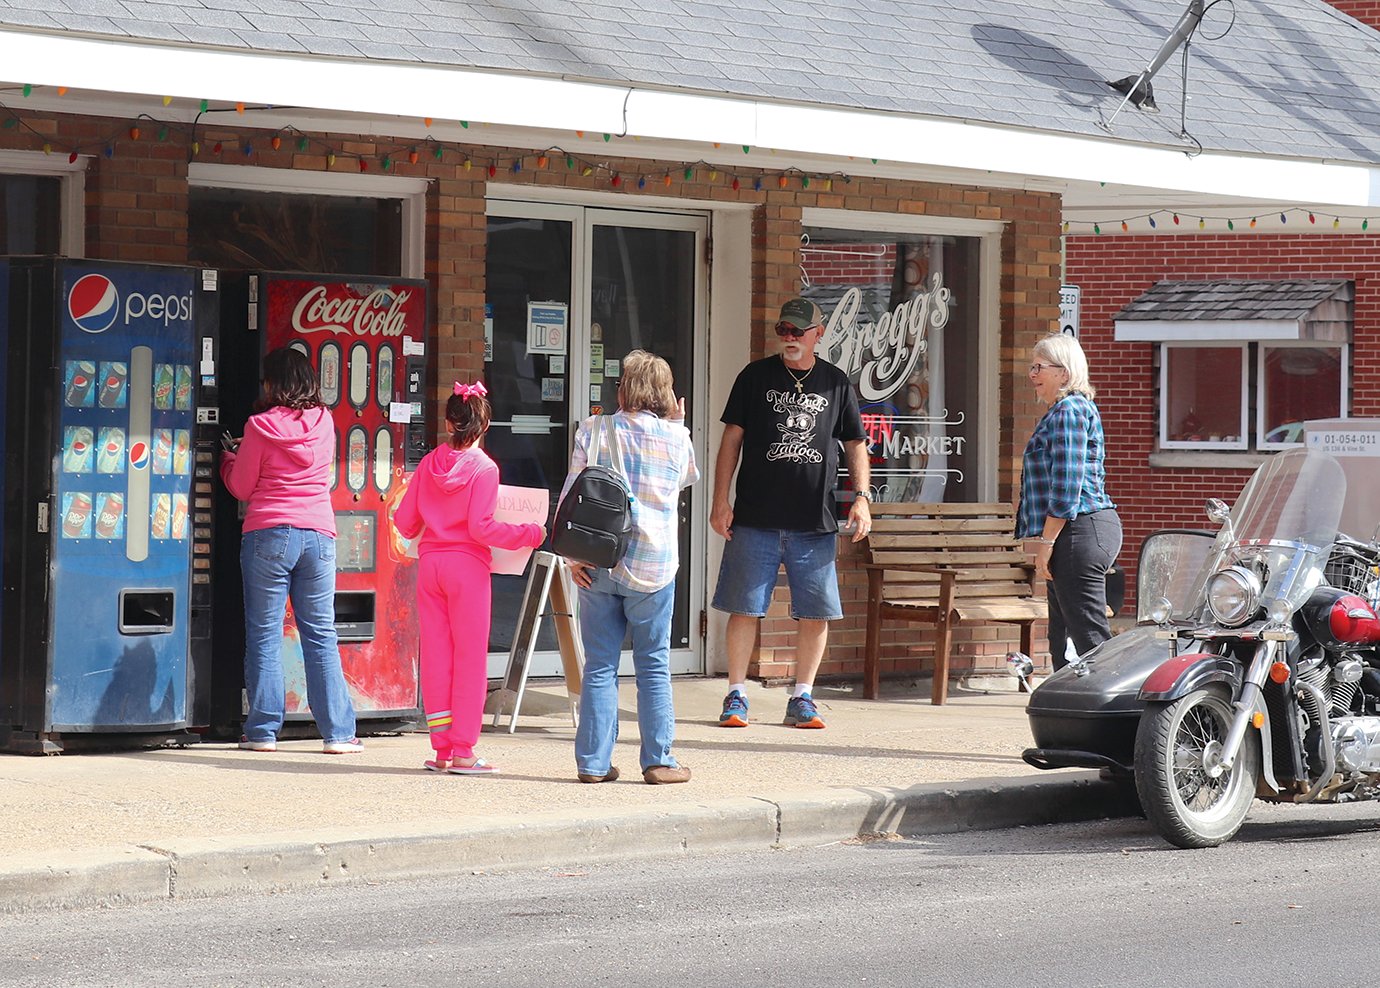 Even a quick stop for a drink can be an opportunity to raise awareness for breast cancer, exemplified Monday near the entrance of Gregg's Corner Market in Waynetown.